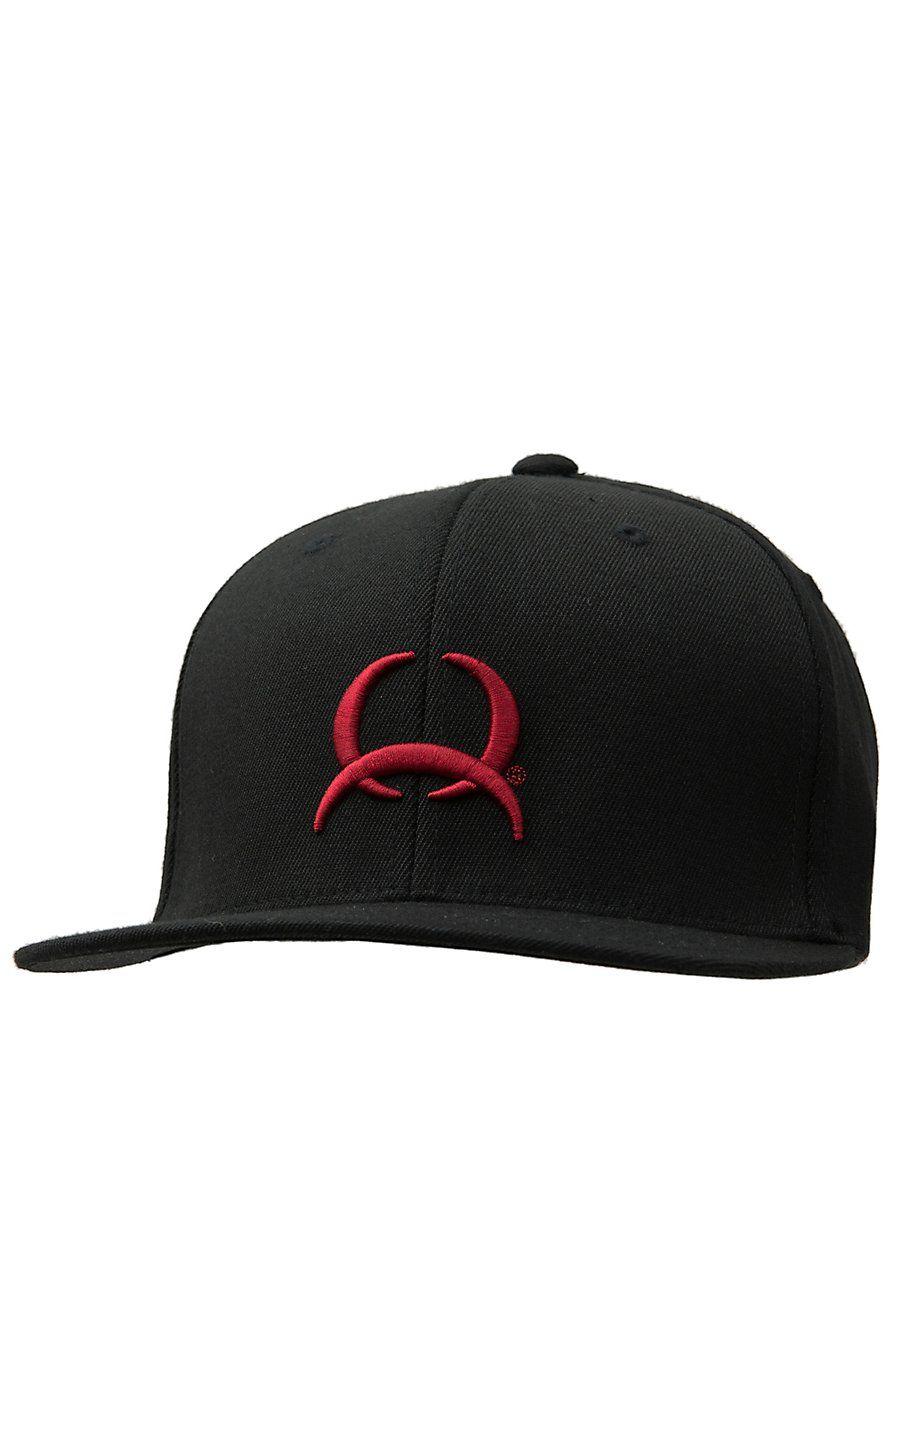 Red and Black Western Logo - Cinch Black with Red Tech Logo Flex Fit Cap | Cowboy Hats & Caps ...